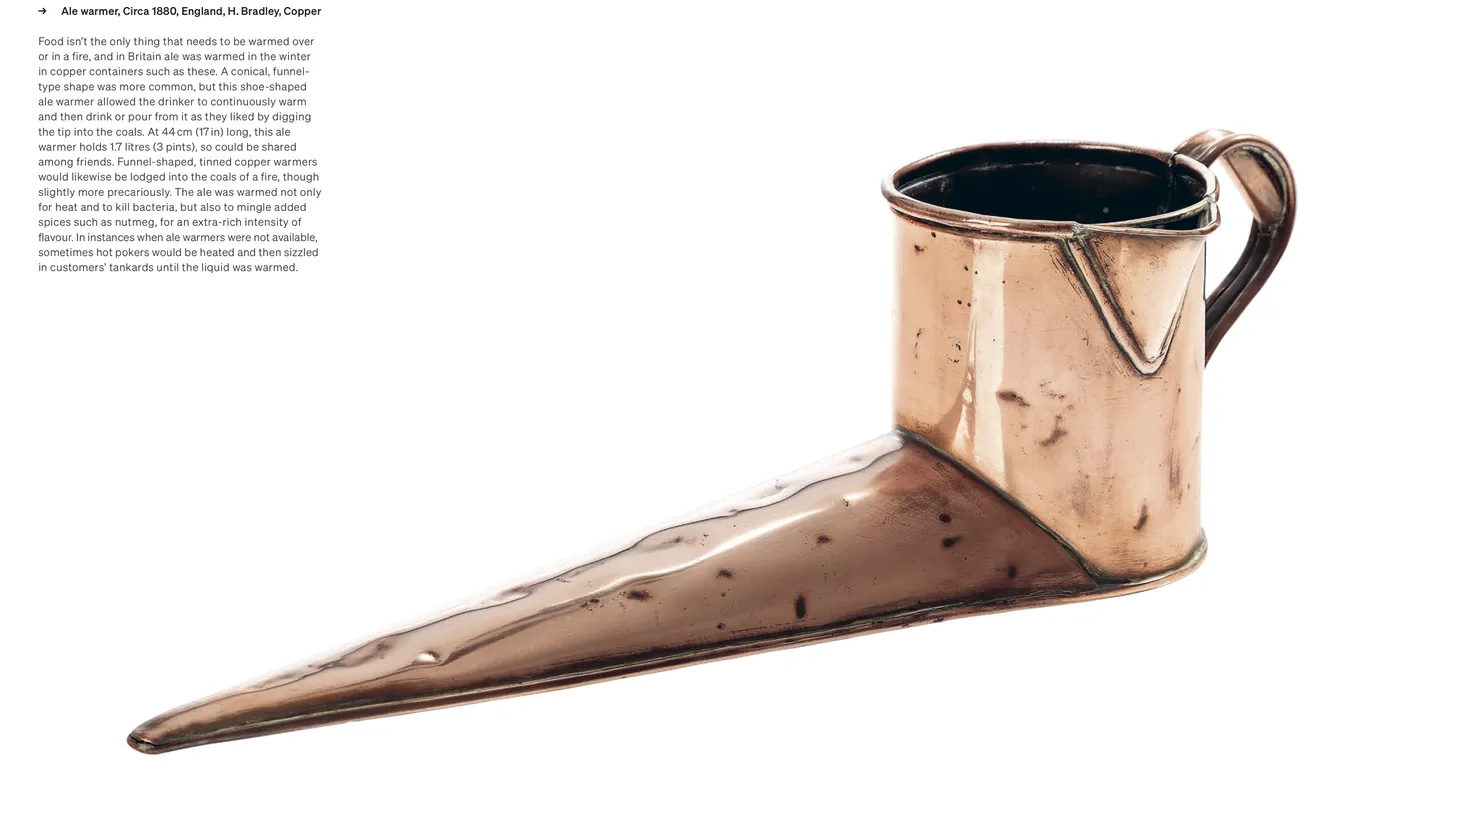 A copper ale warmer used during winter months can be found in the “Heat and Transform” chapter of “Tools for Food,” Corinne Mynatt’s compendium of kitchen implements from all over the world and across eras.